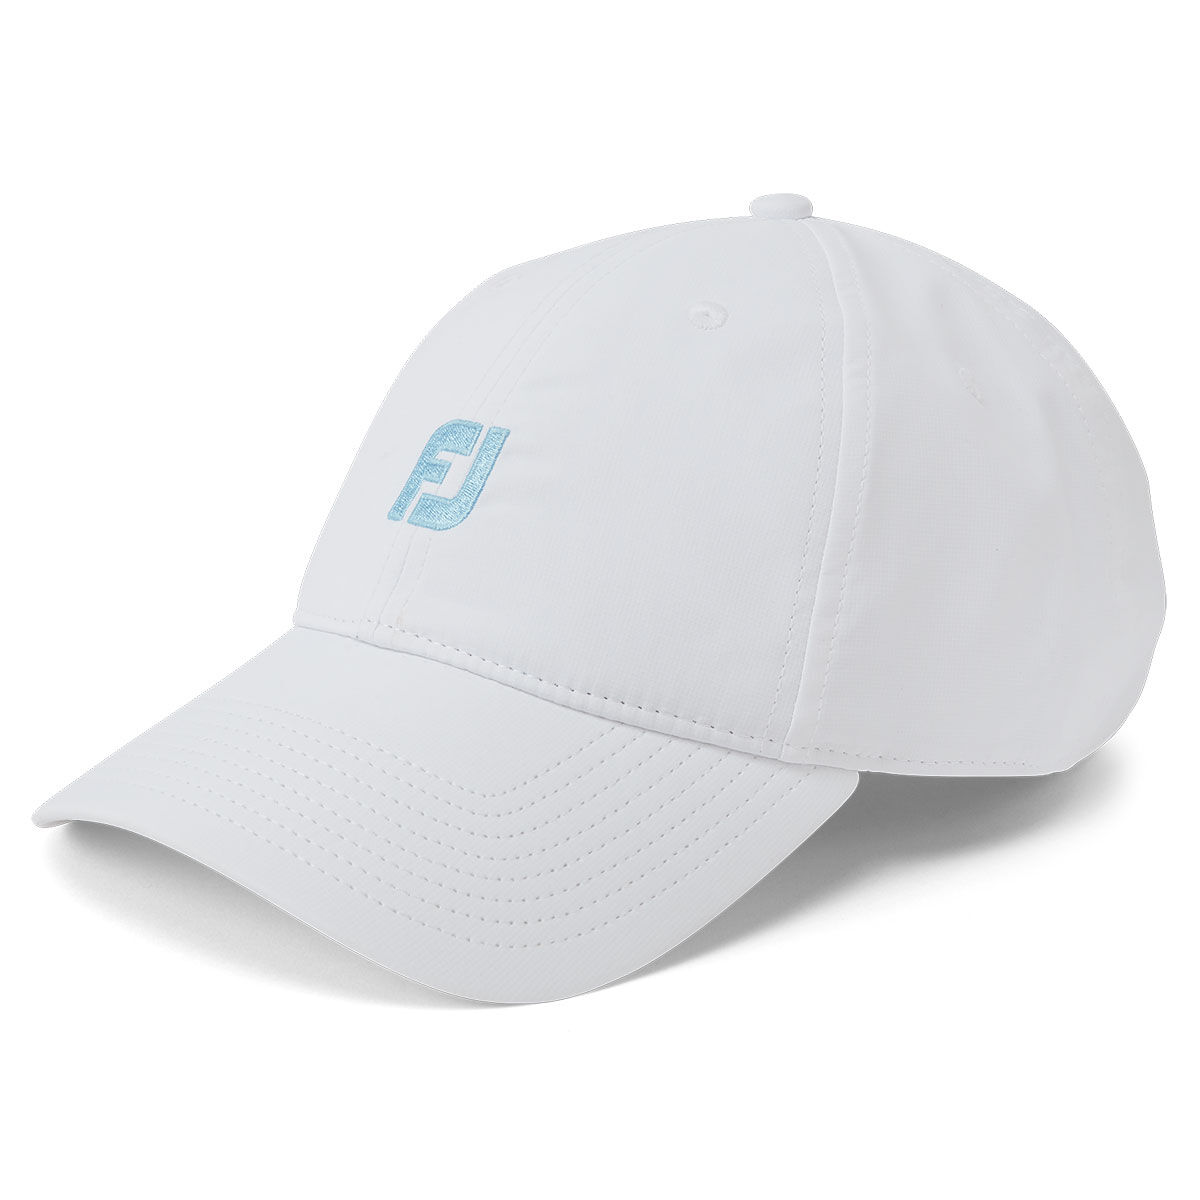 FootJoy Men’s White and Blue Comfortable Embroidered FJ Golf Cap | American Golf, One Size